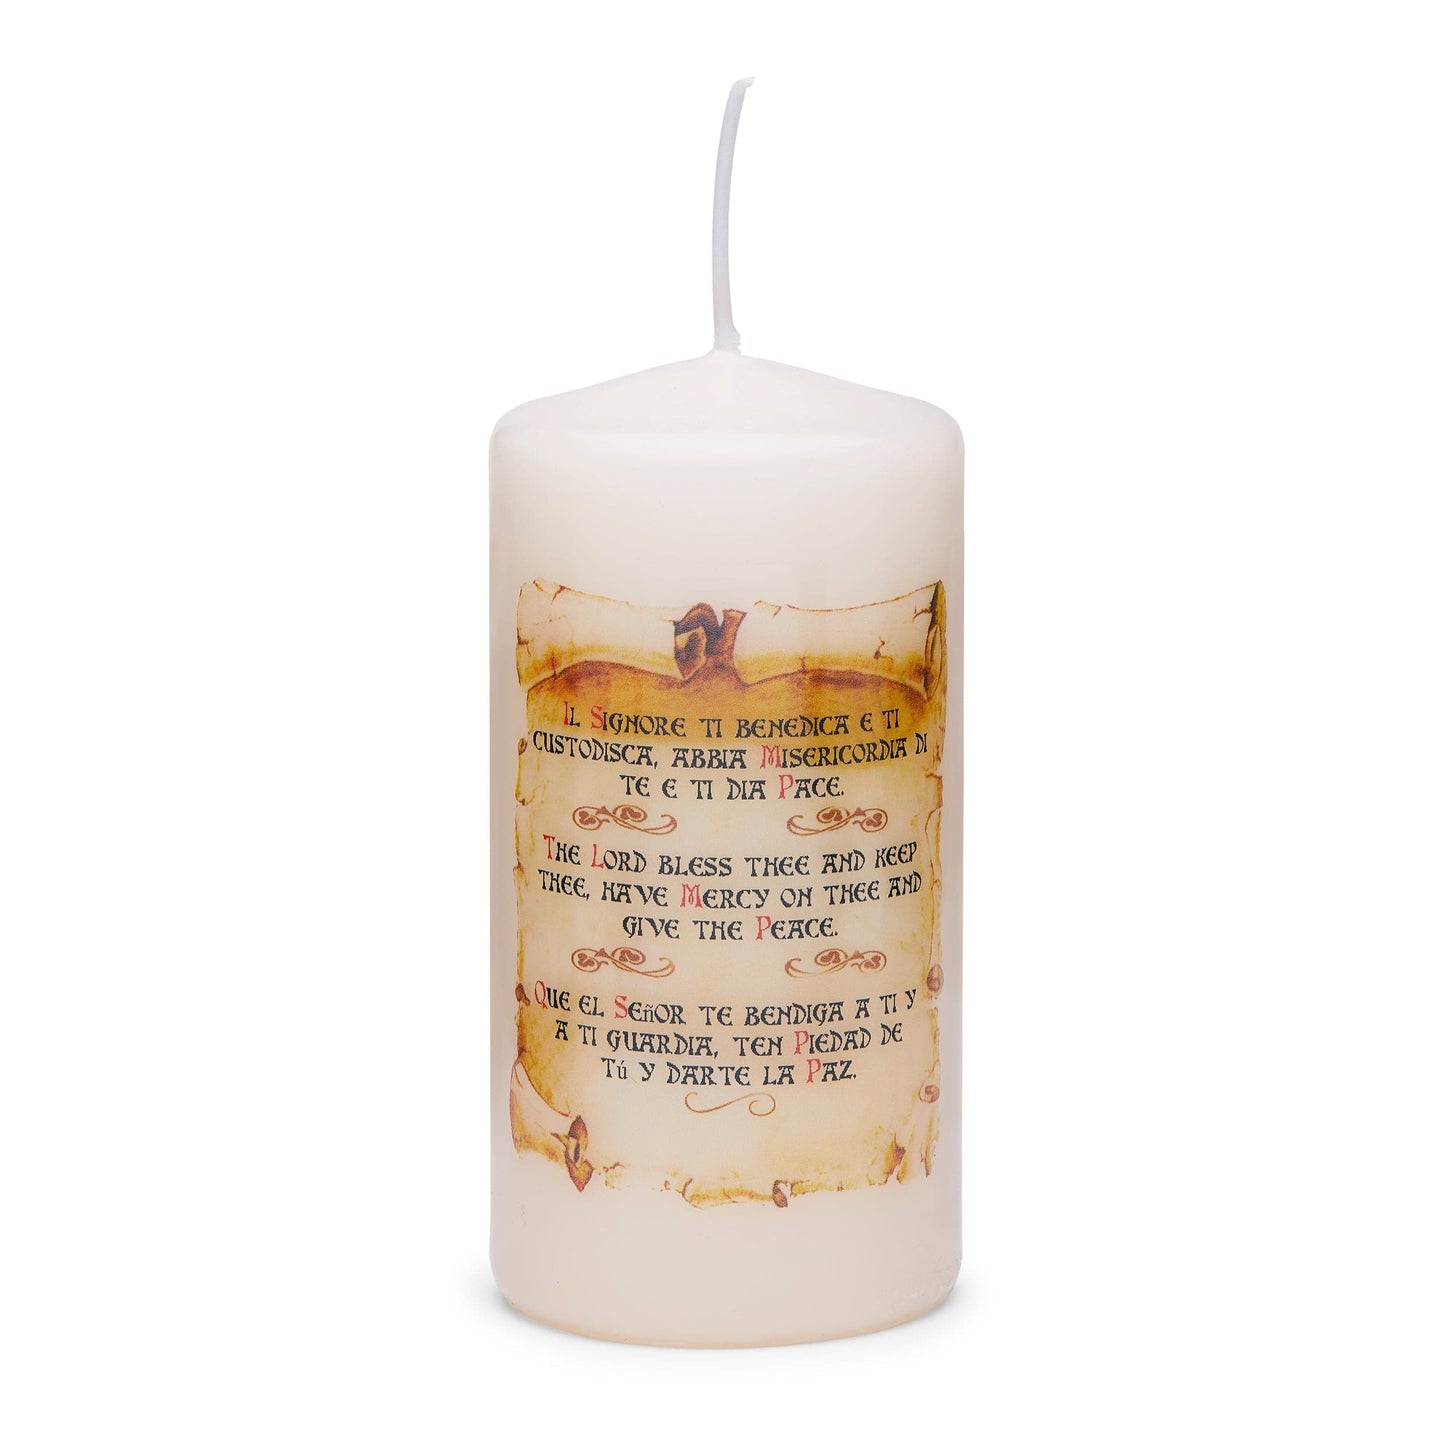 MONDO CATTOLICO Cm 10 (3.9 inches) Candle with the Holy Family